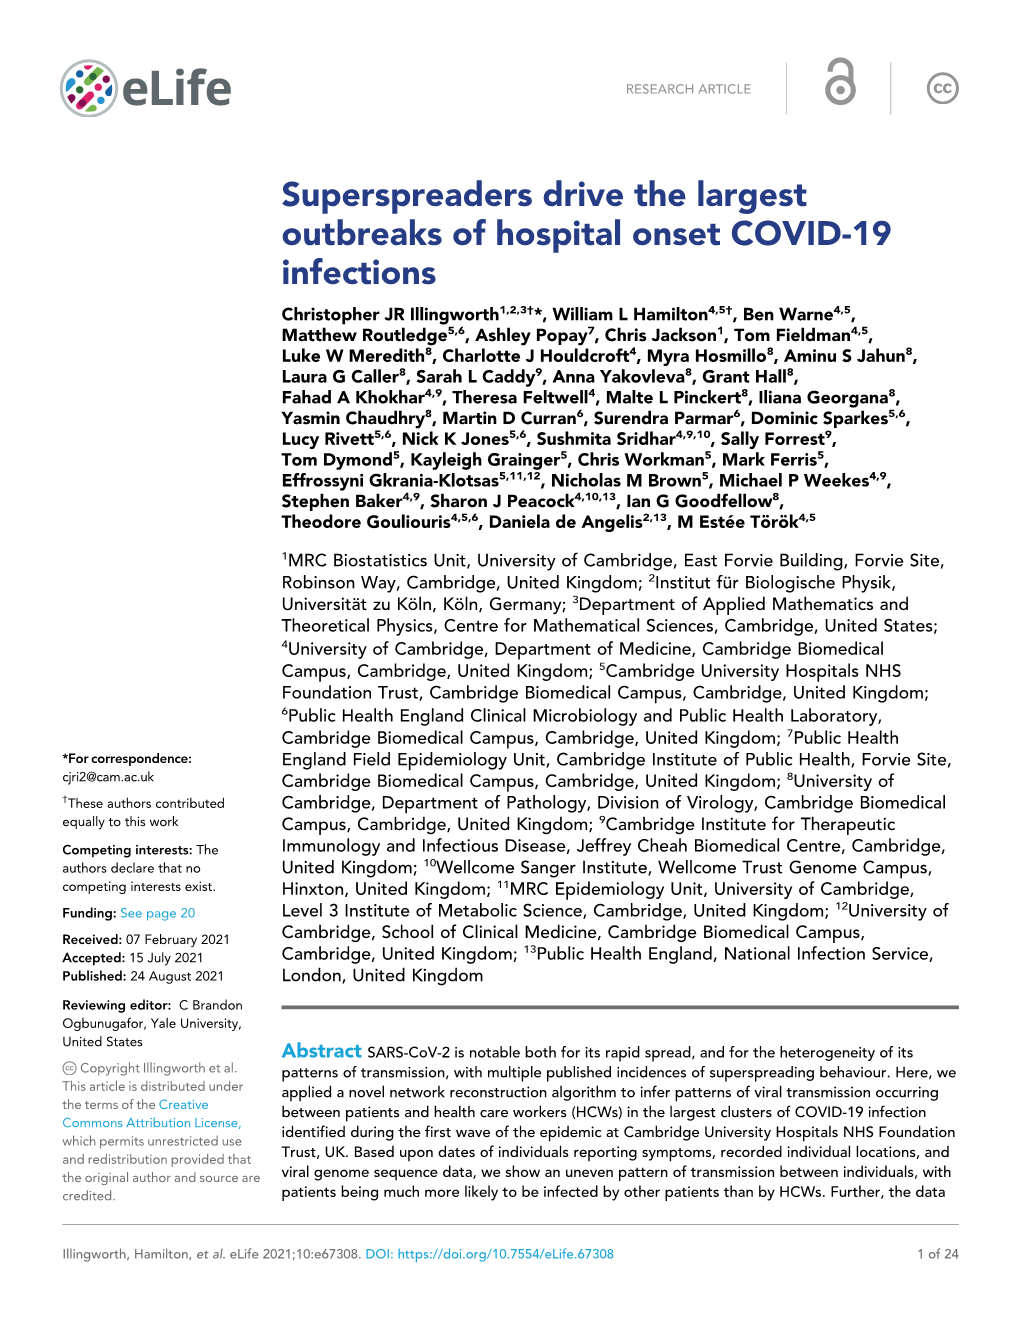 Superspreaders Drive the Largest Outbreaks of Hospital Onset COVID